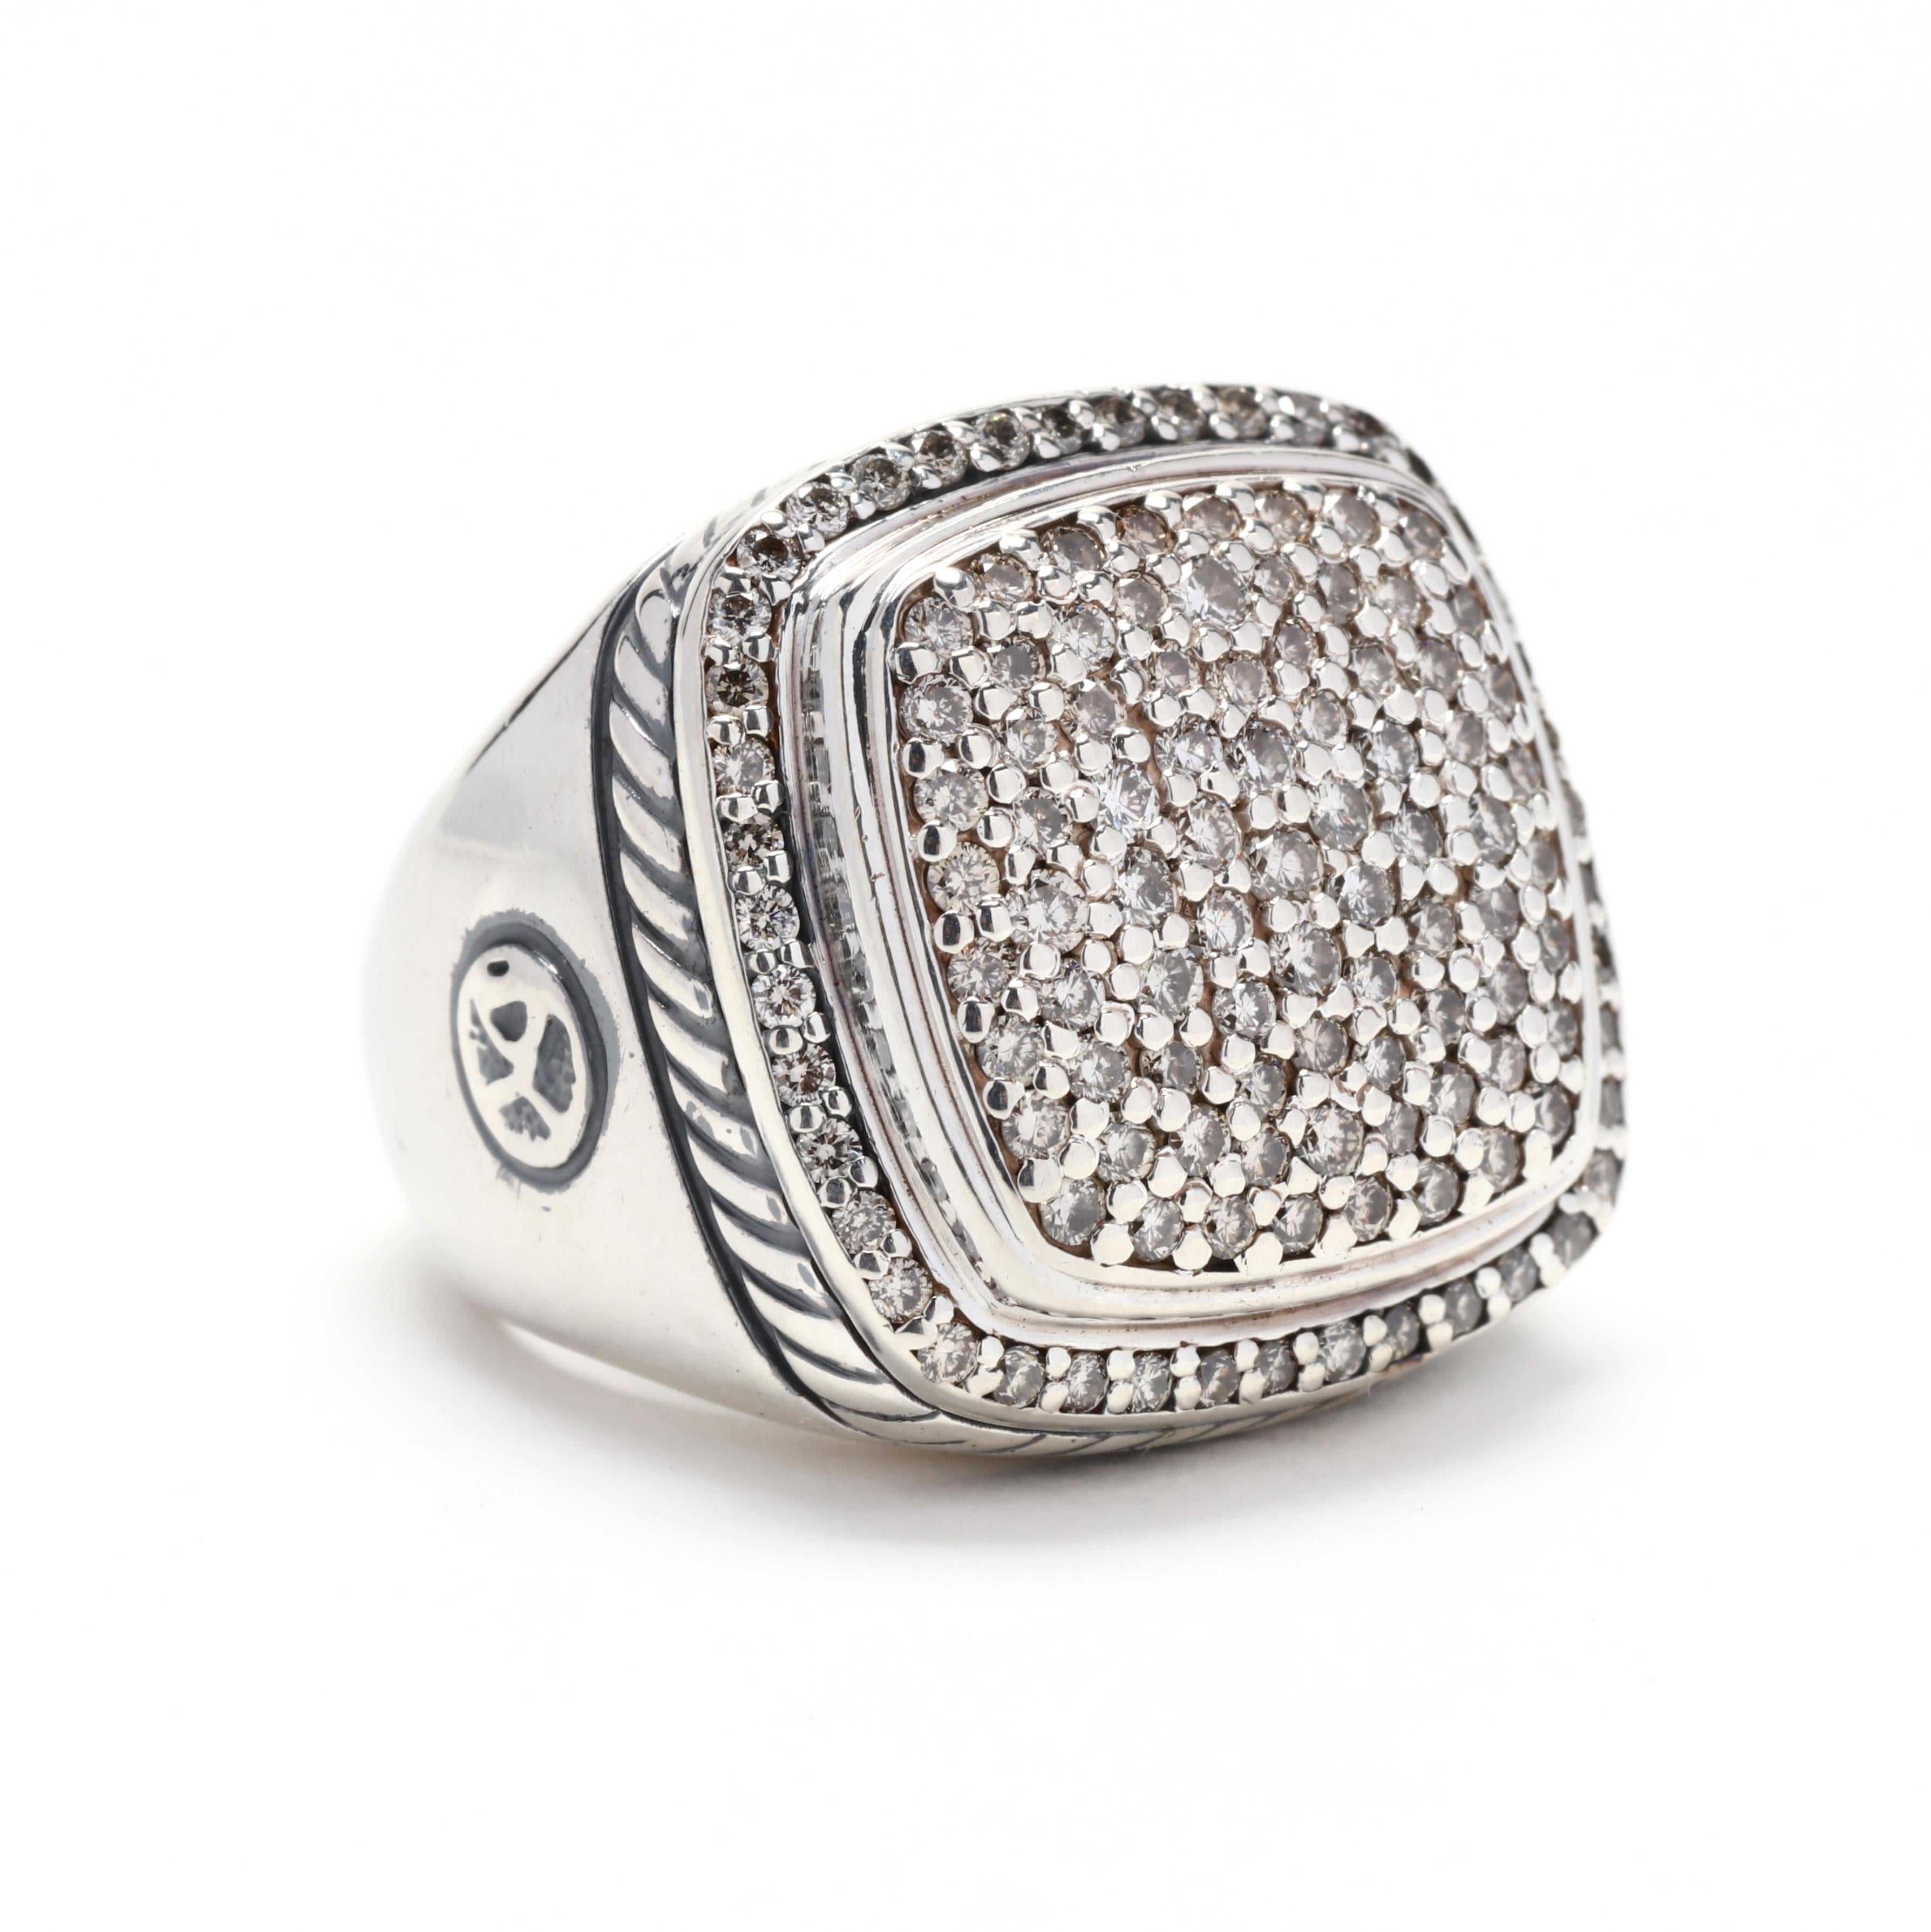 A vintage sterling silver pavé diamond statement ring by David Yurman. This ring from the Albion collection features a cushion shape with pavé set dull cut round diamonds weighing approximately 1 total carats with a cable motif border and a tapered